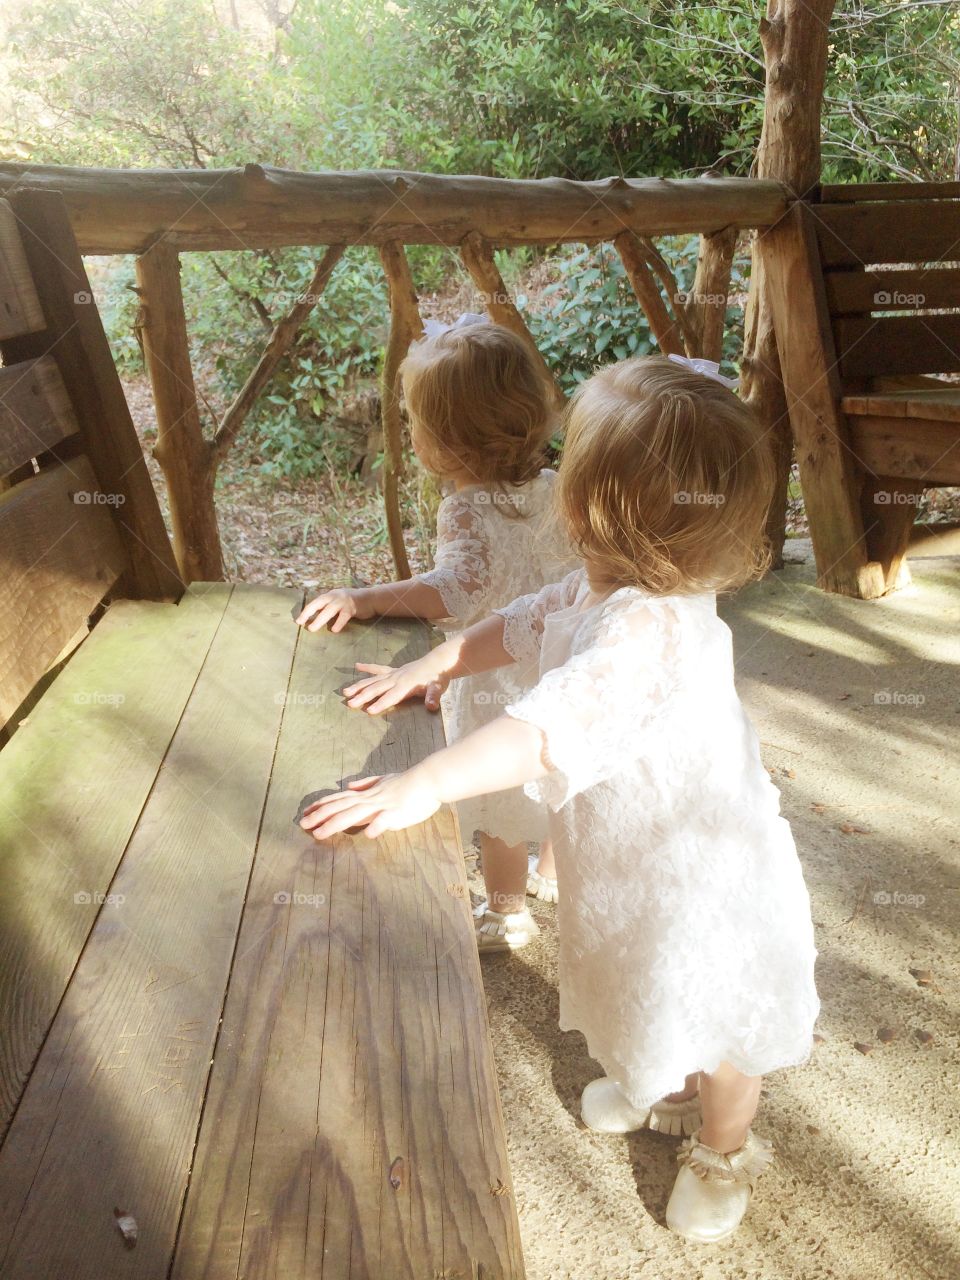 Identical blonde toddler baby girls propping selves up on wooden bench in white lace dresses in garden atrium 